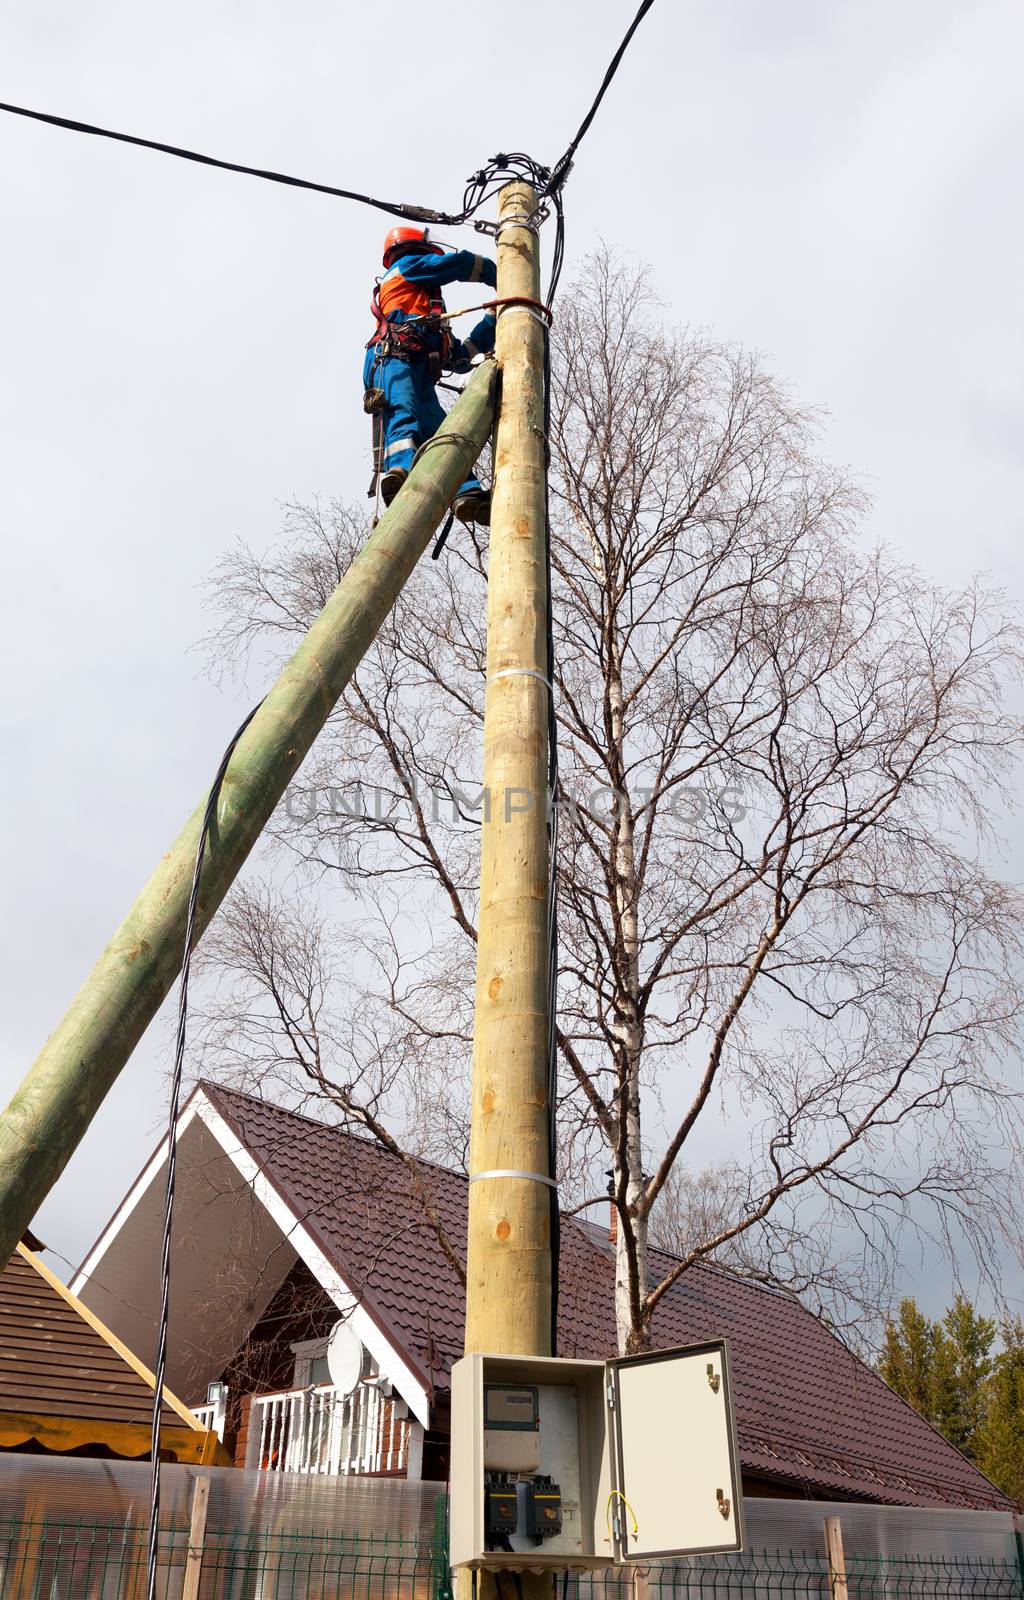 Electrician connects wires on a pole in a country house by AleksandrN